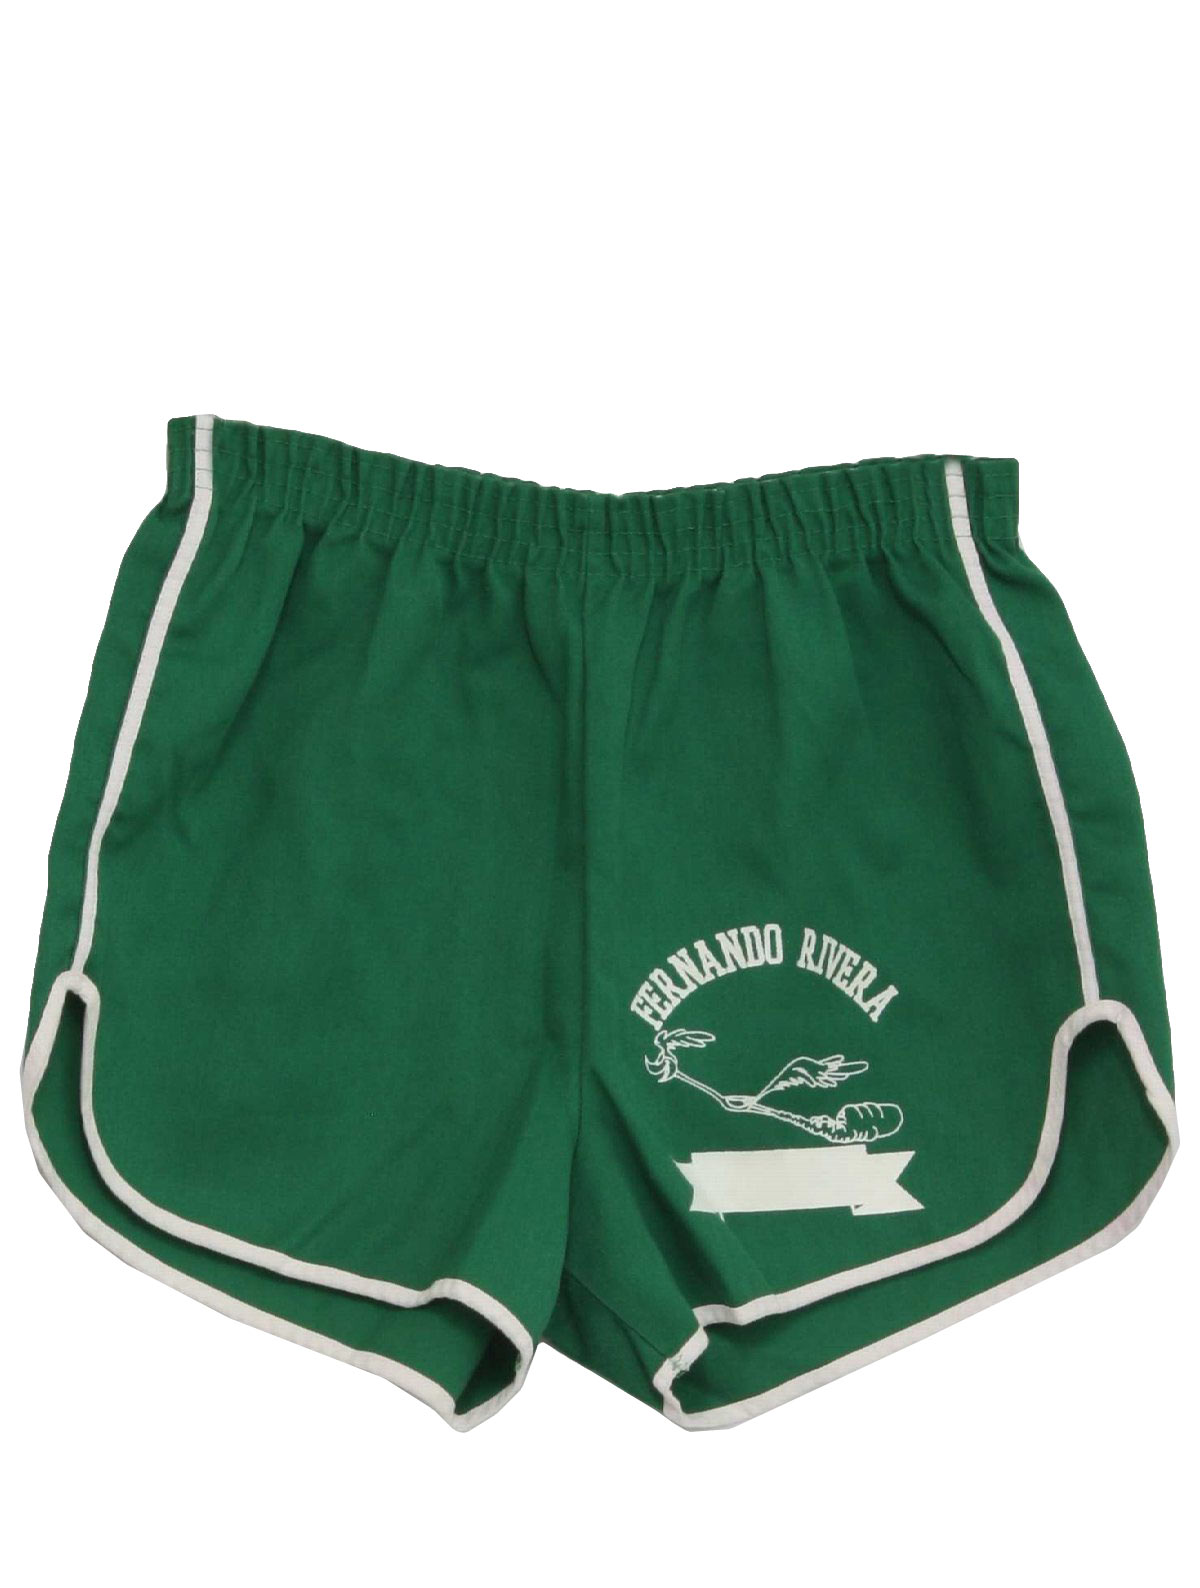 Retro 1980s Shorts: 80s -Athletic Shorts- Mens green and white polyester  and cotton slide on totally 80s gym shorts with elastic waistline and lower  left hem -Fernando Rivera- print in white.